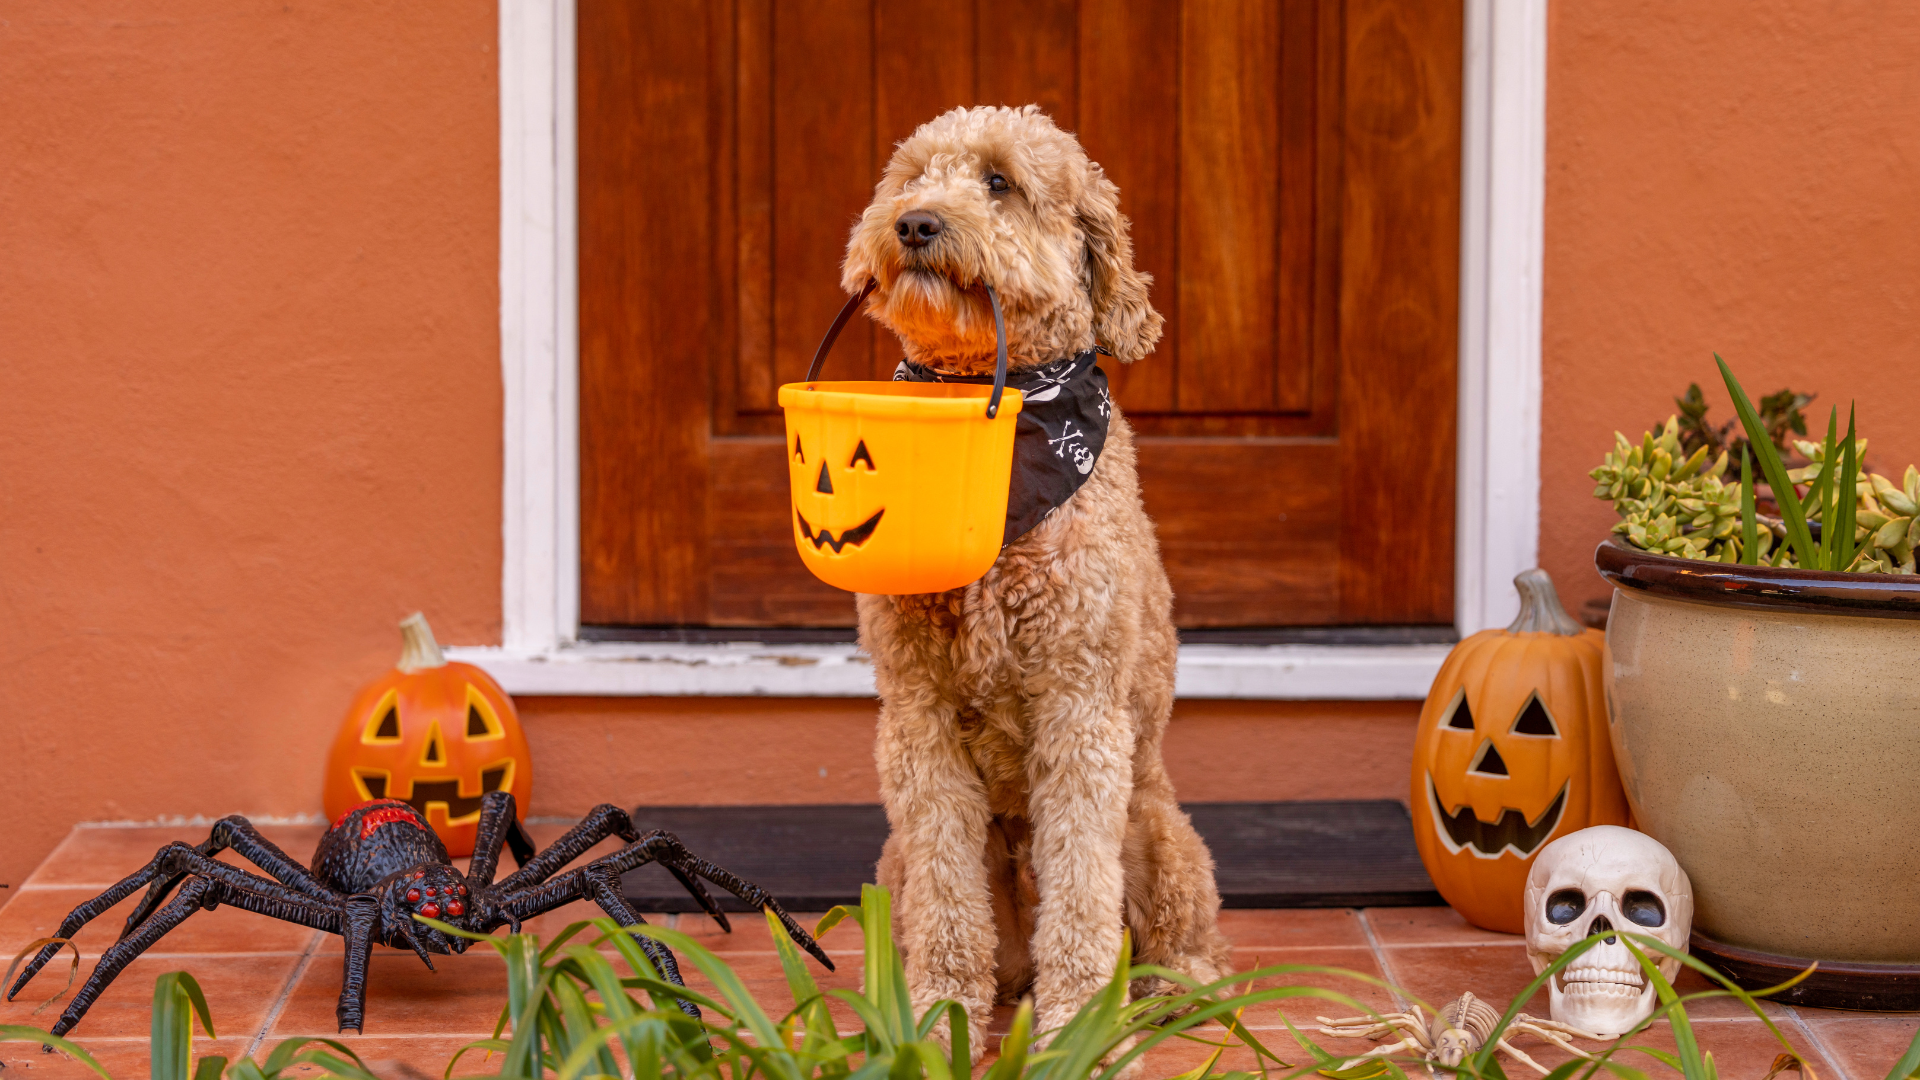 How to Have a Safe and Spooktacular Halloween